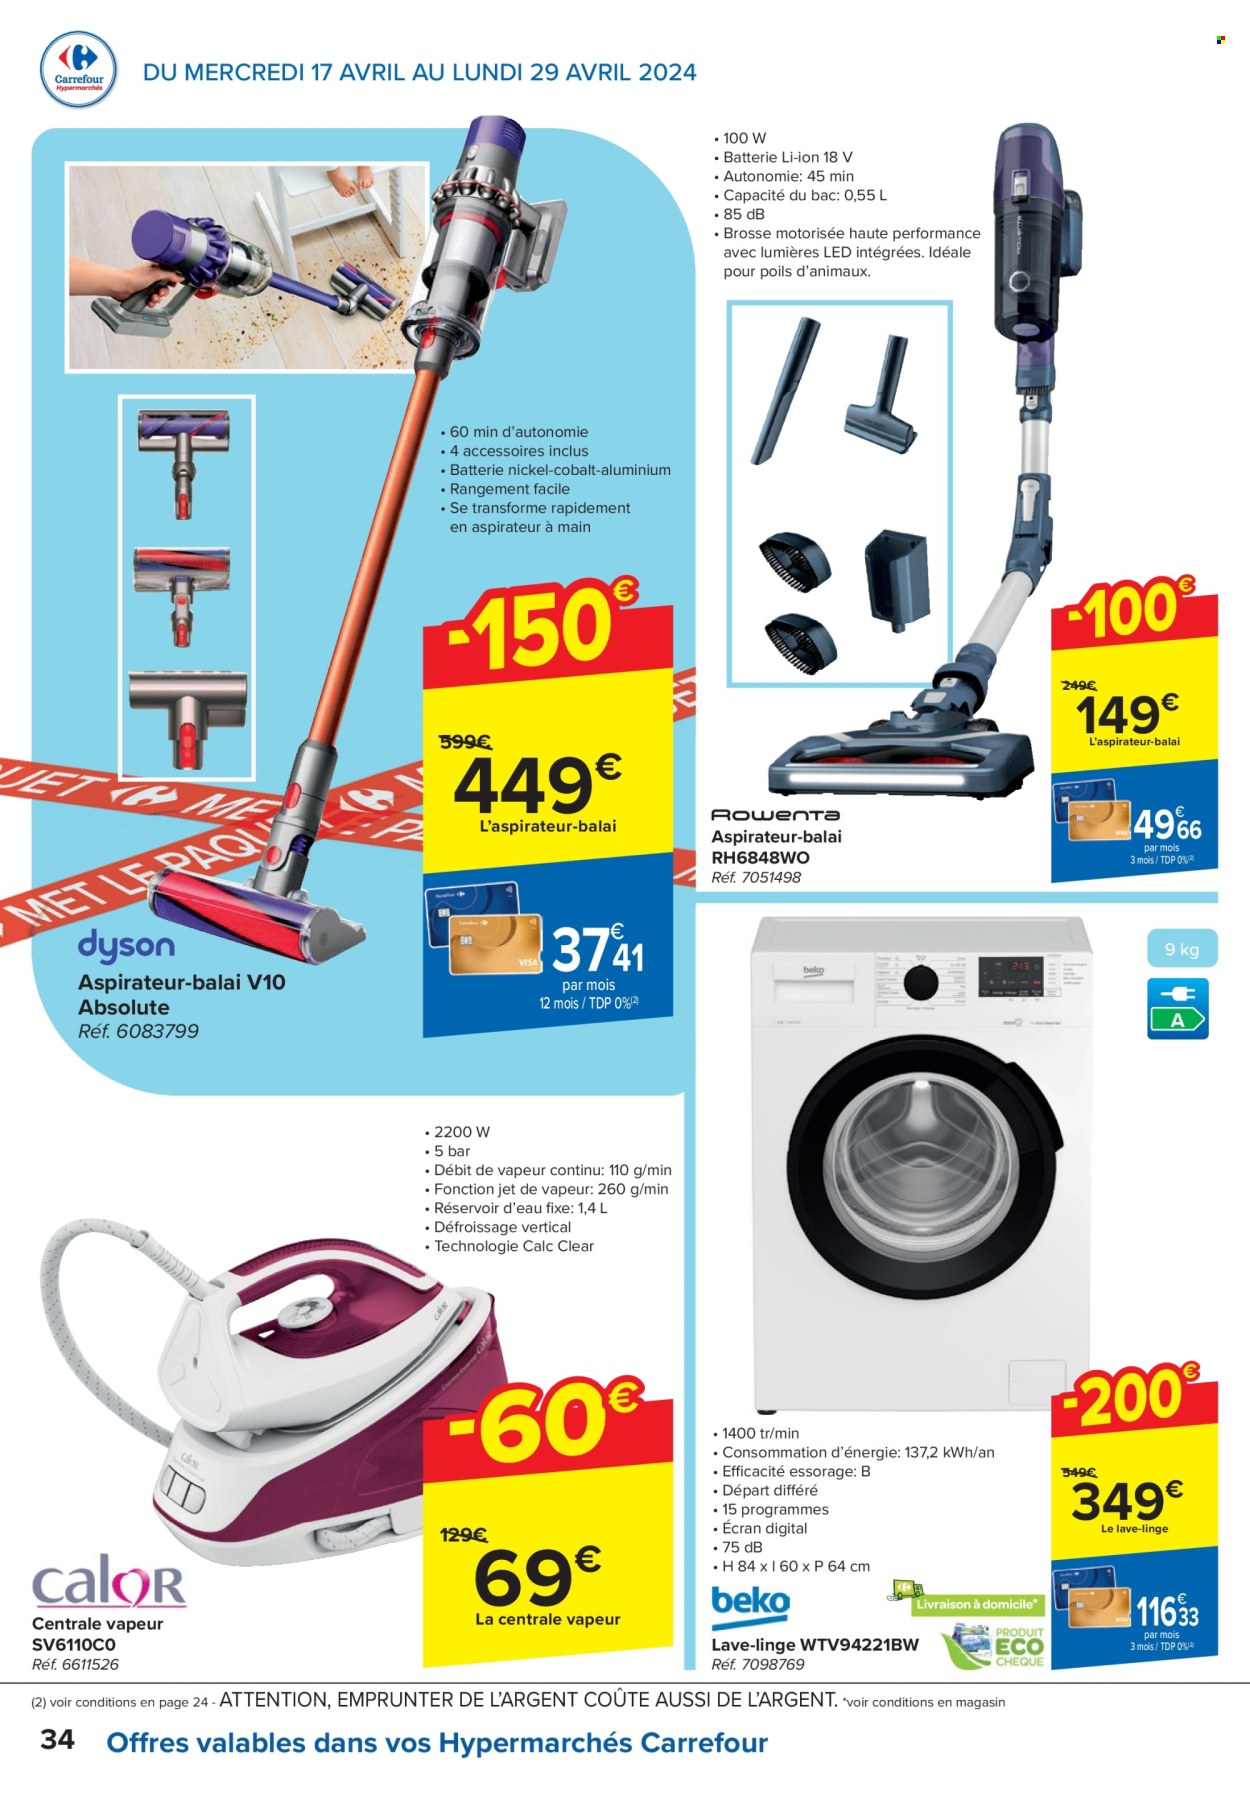 Catalogue Carrefour hypermarkt - 17.4.2024 - 29.4.2024. Page 34.